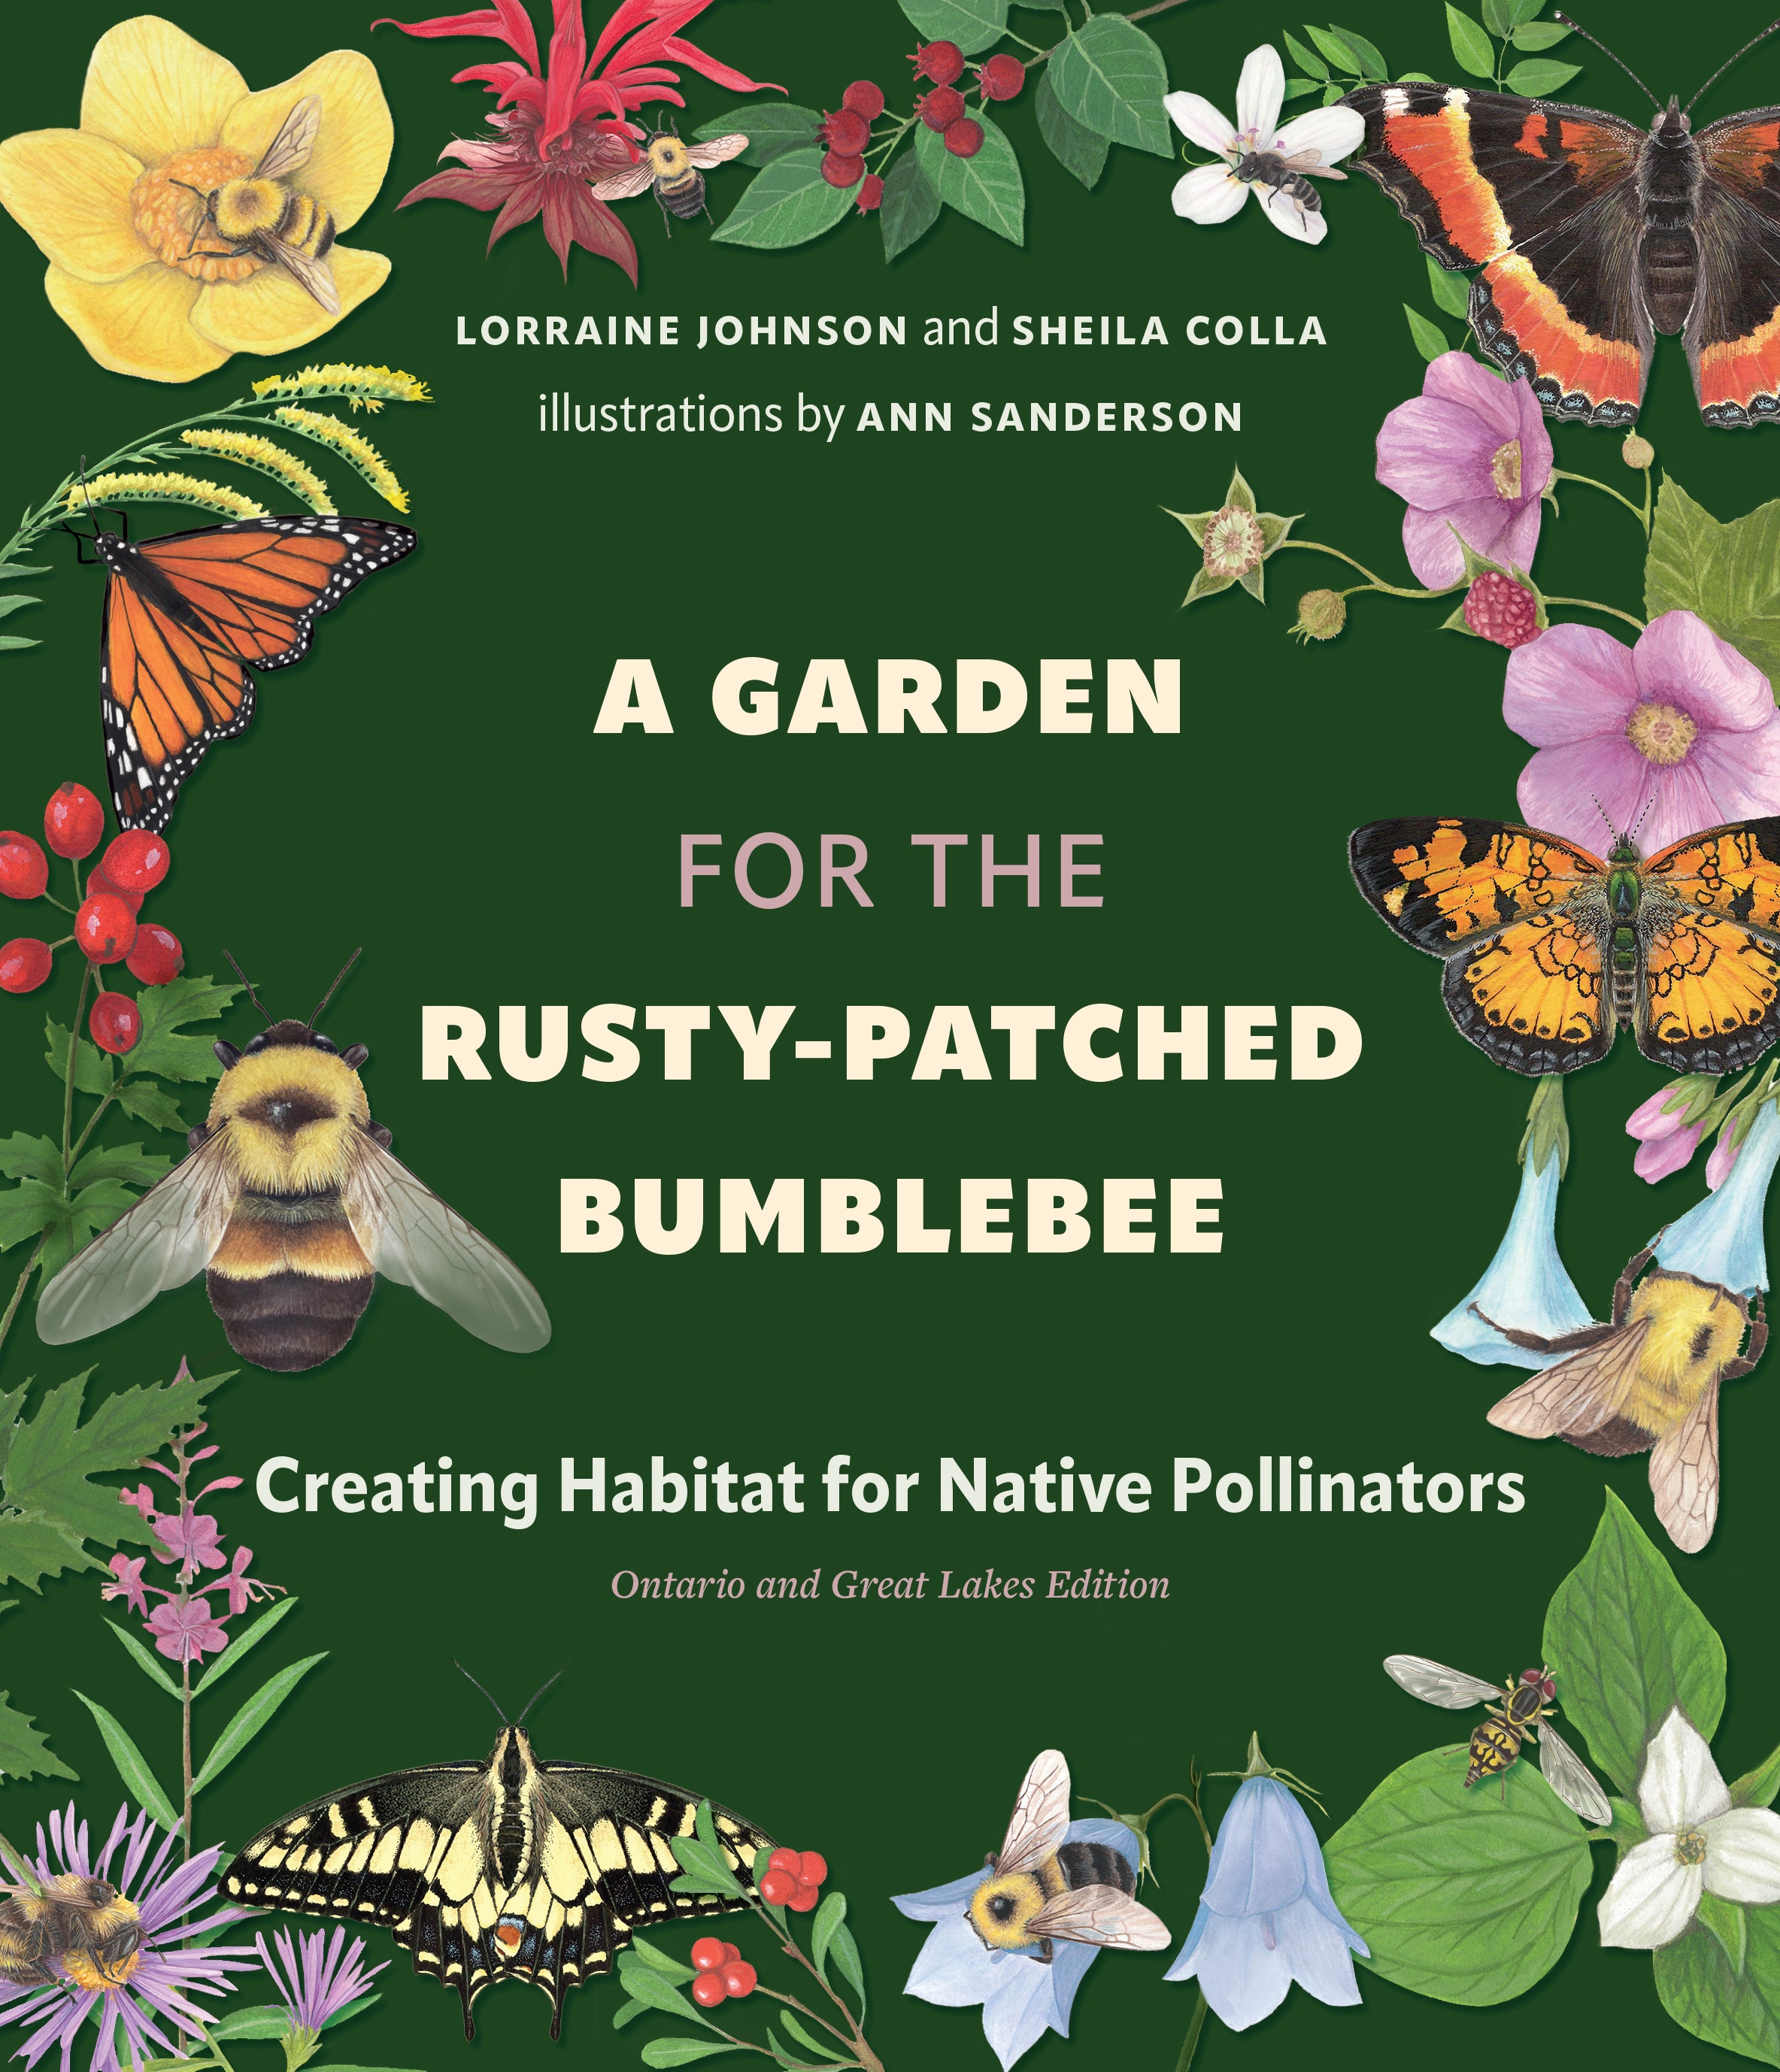 A Garden for the Rusty-Patched Bumblebee